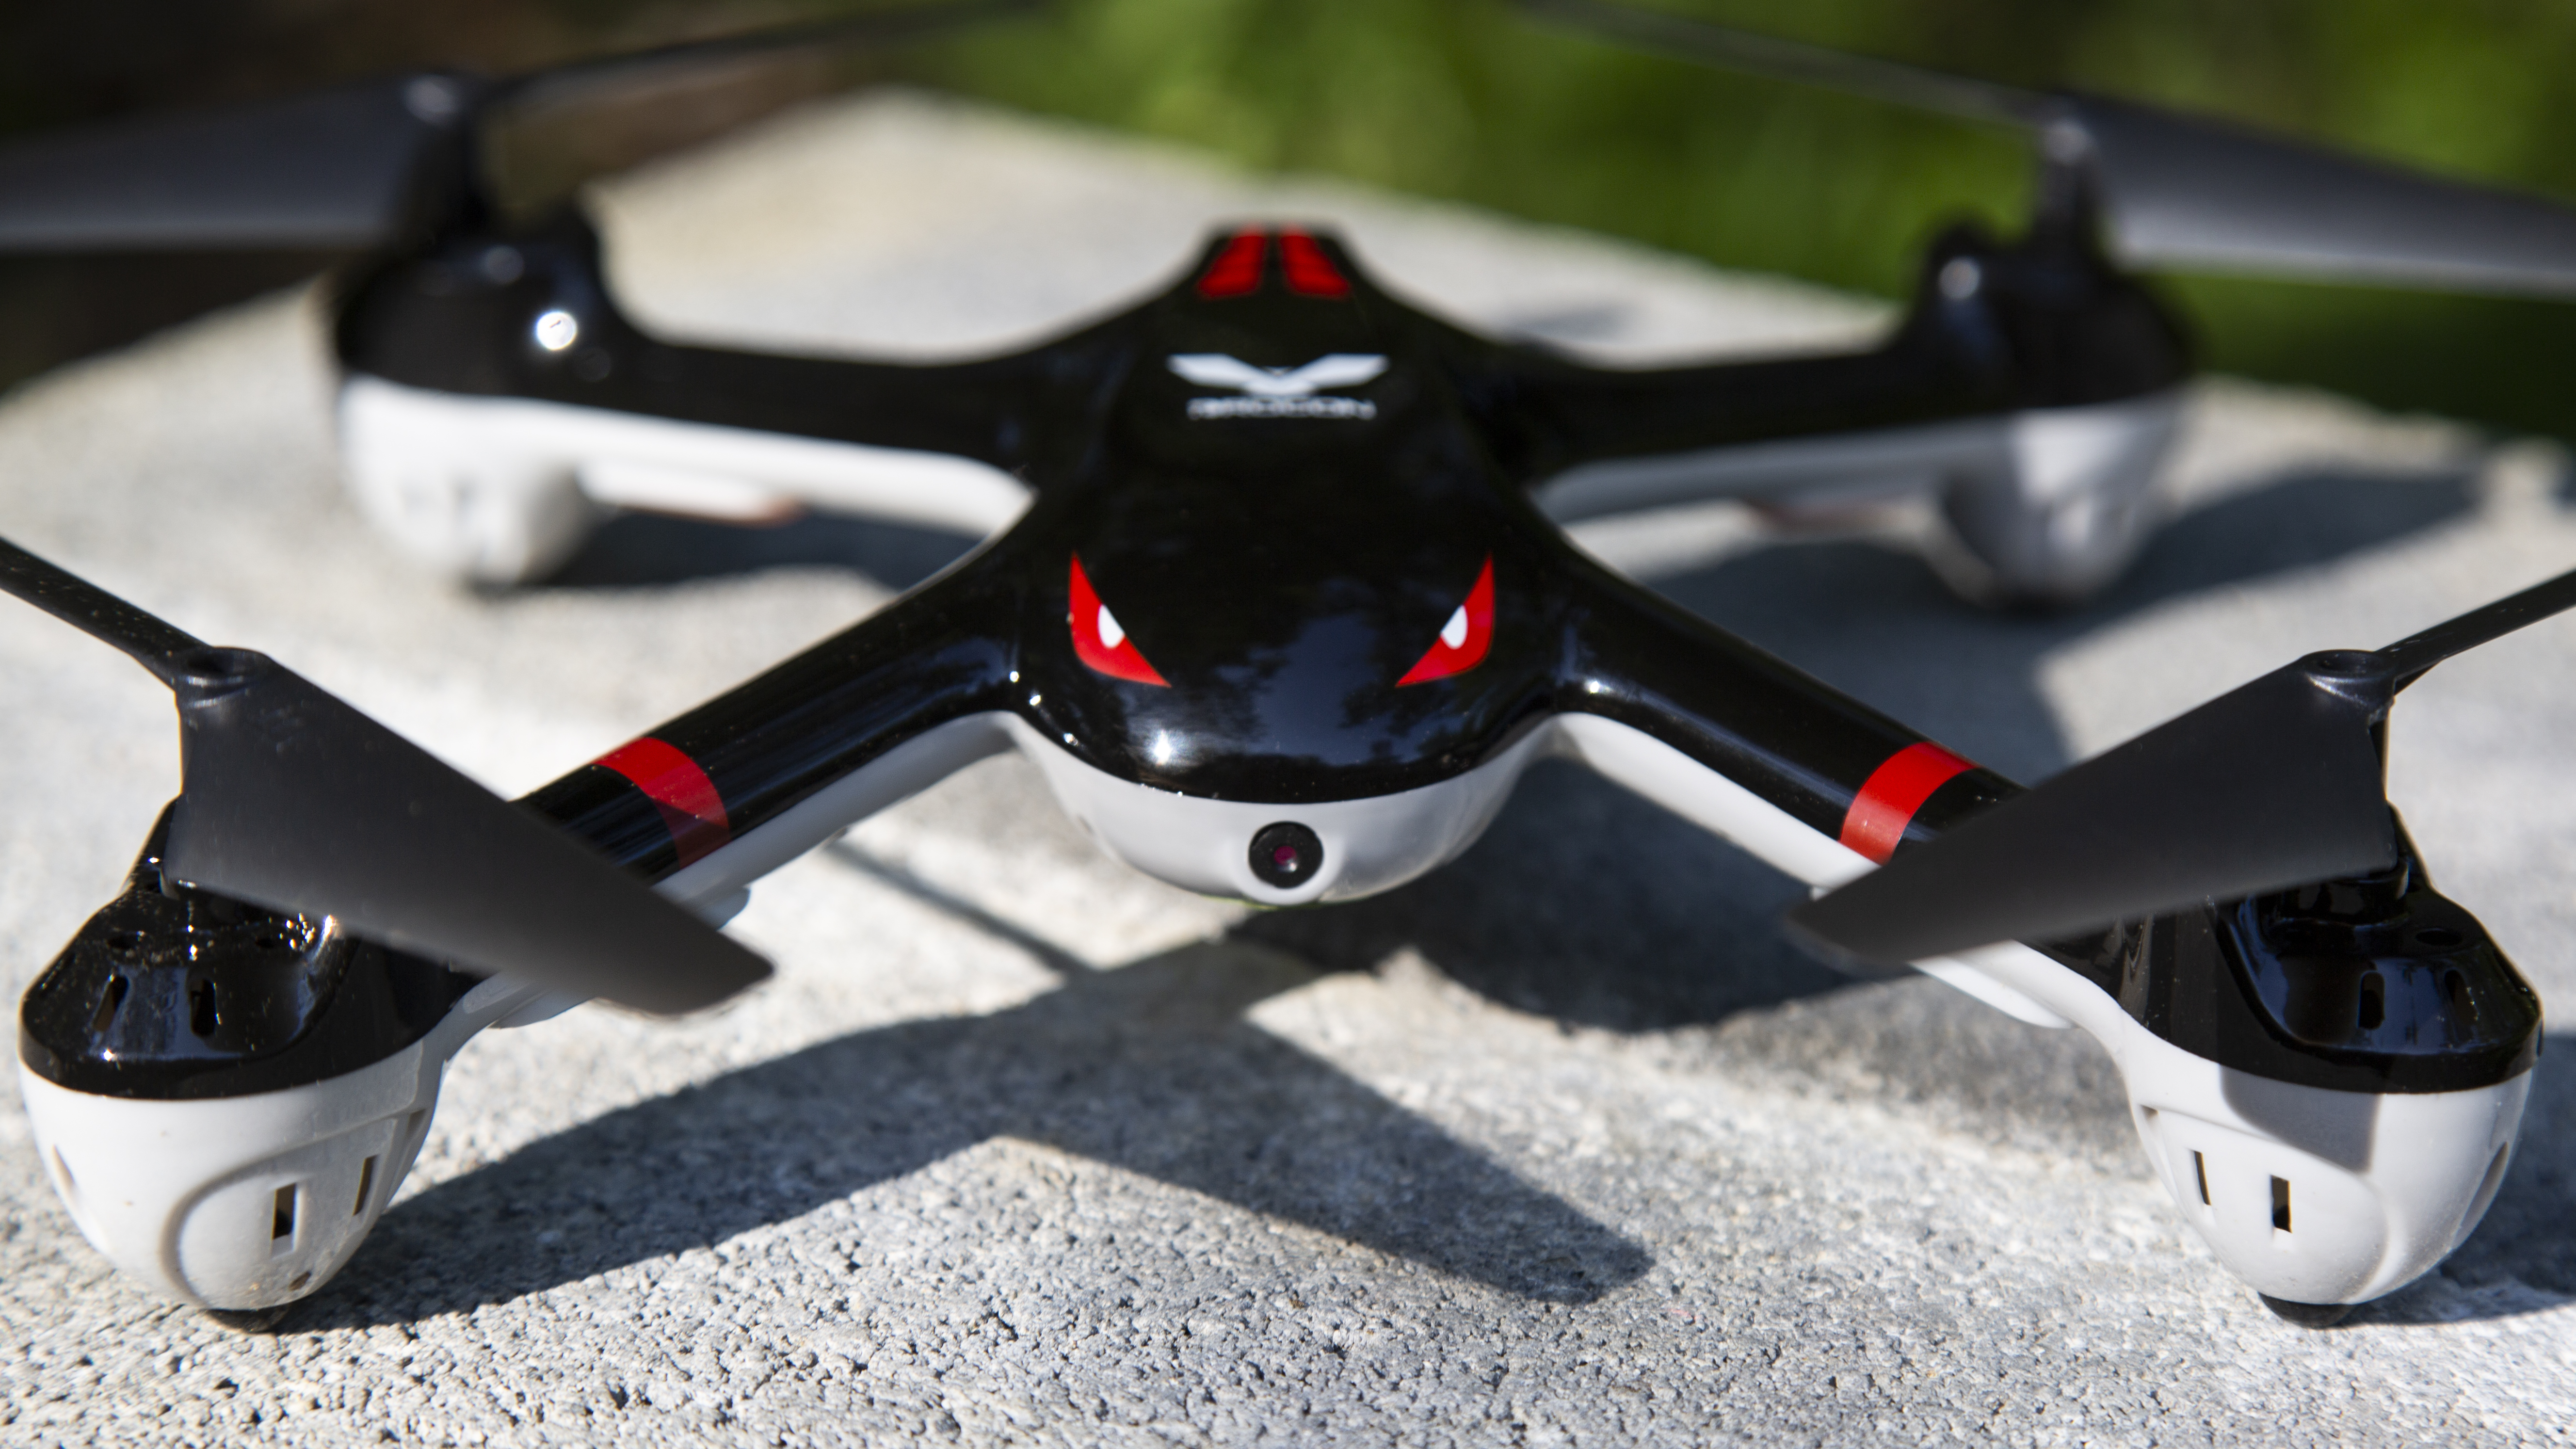 What is a good beginner drone?